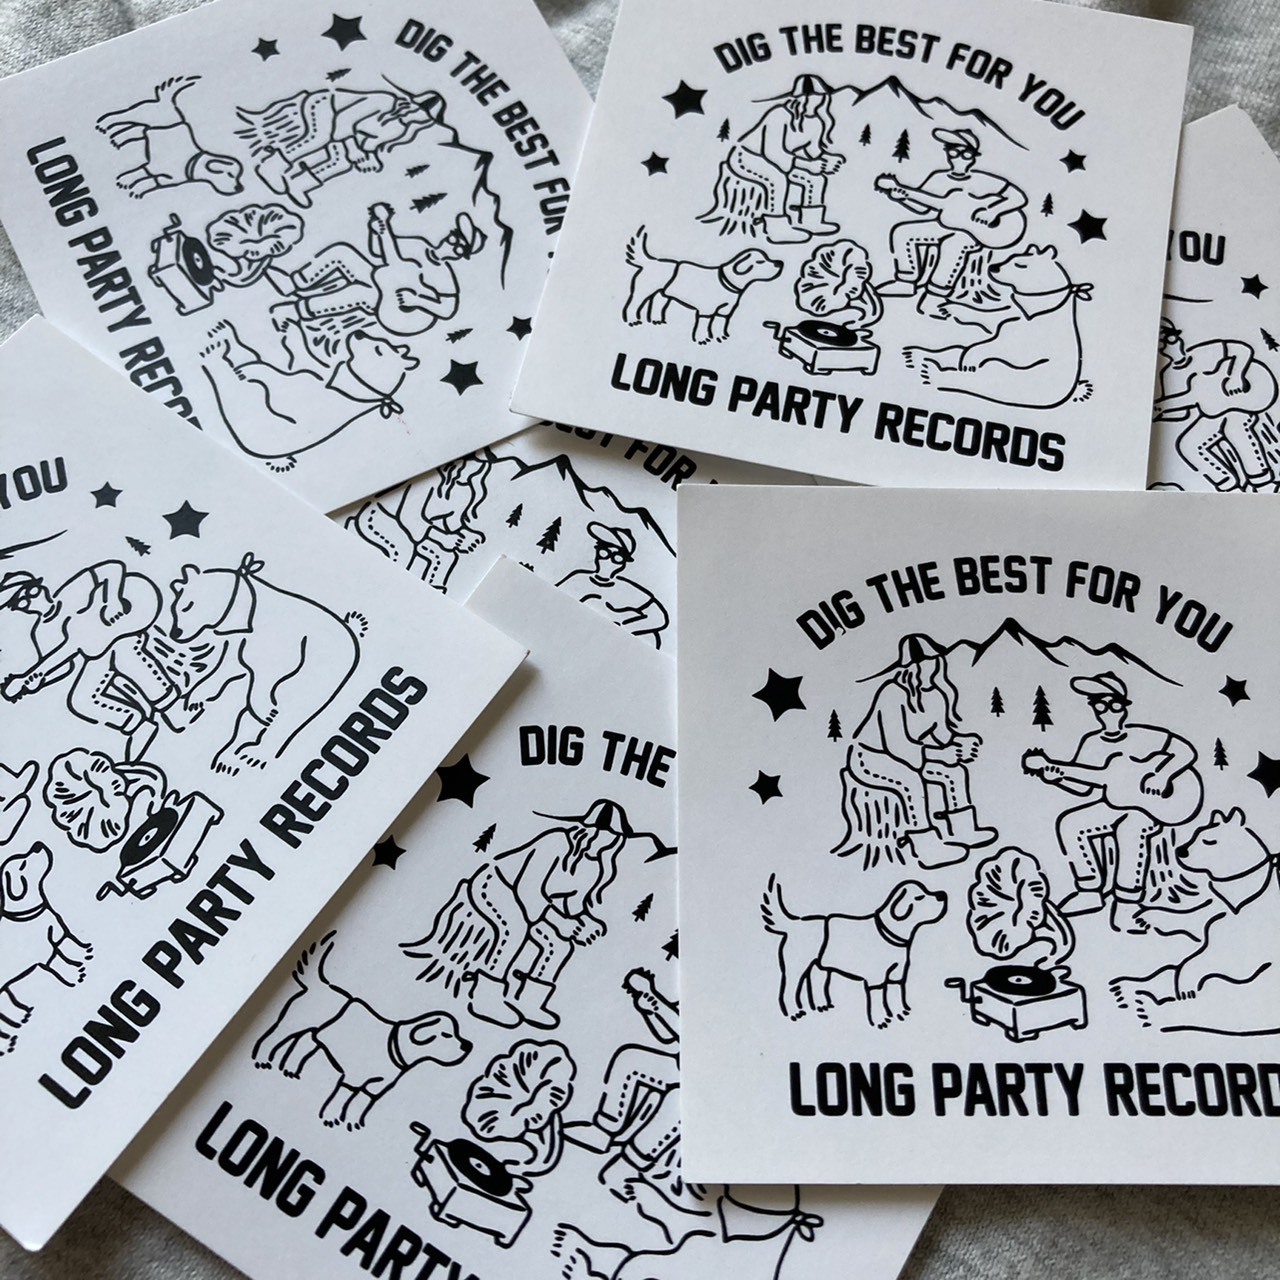 LONG PARTY RECORDS キャンプステッカー